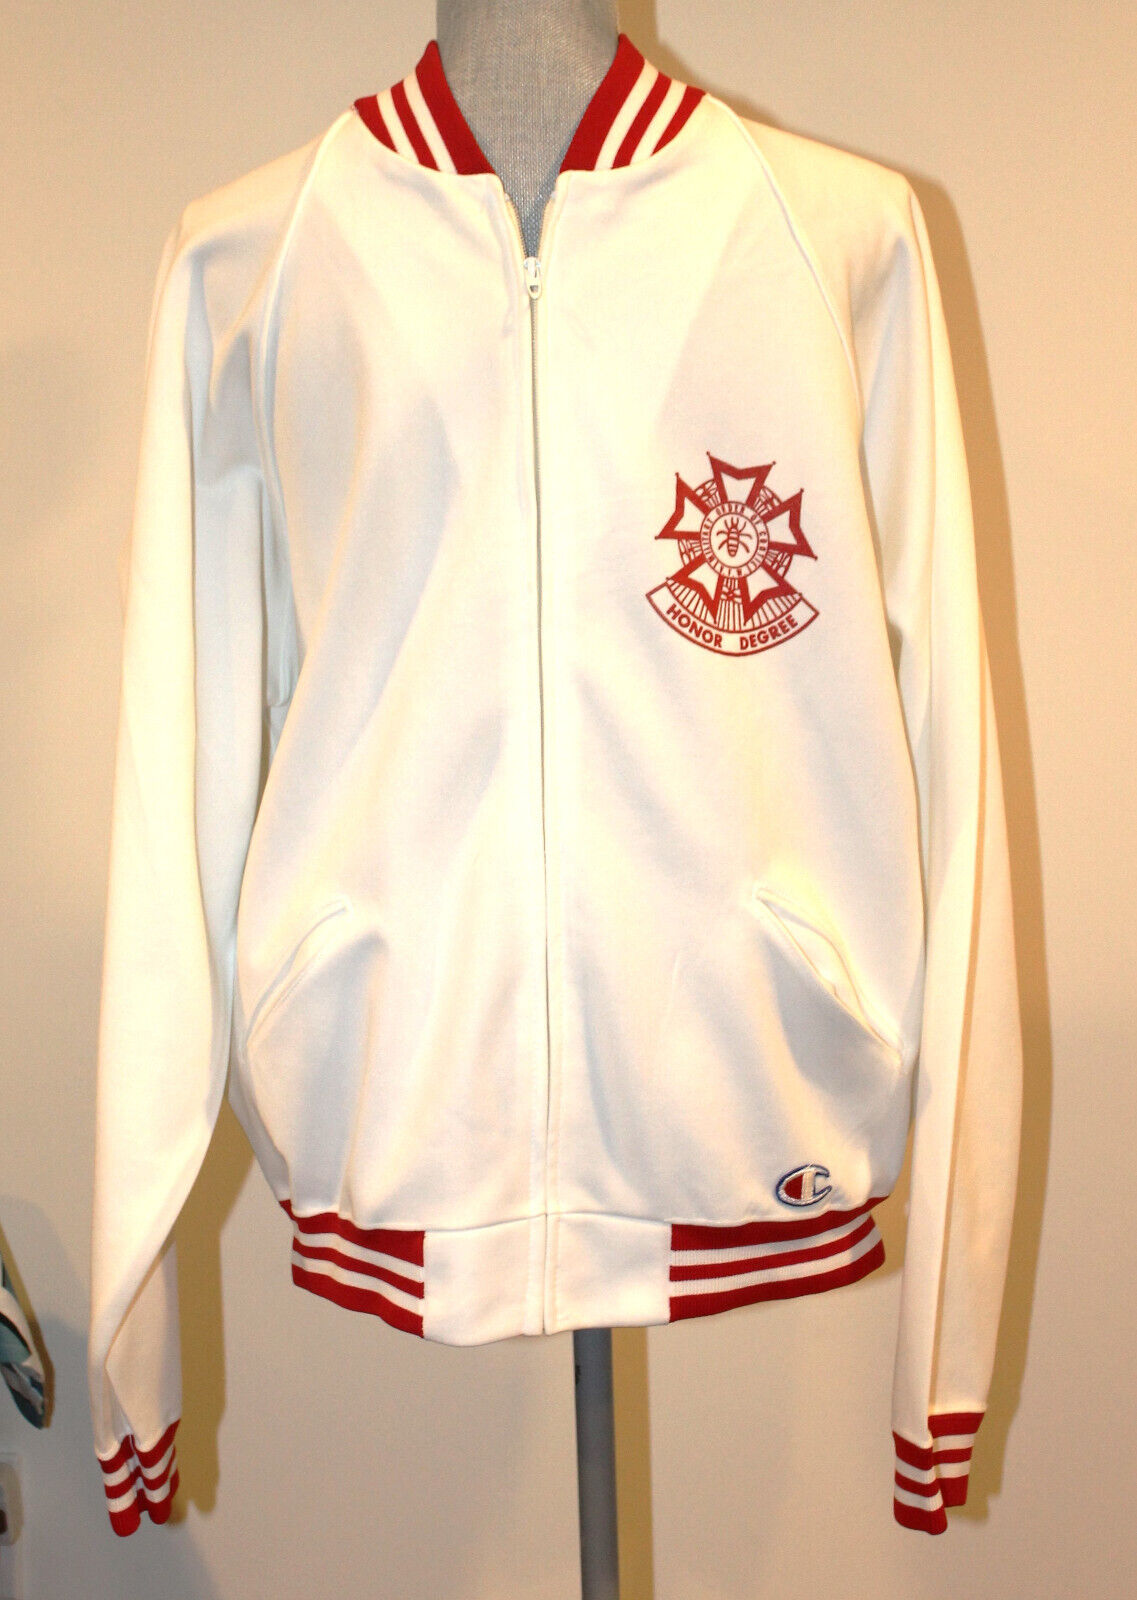 VINTAGE 1970 WHITE CHAMPION TRACK SUIT TOP- ORDER OF THE COOTIE MEN\'S LARGE